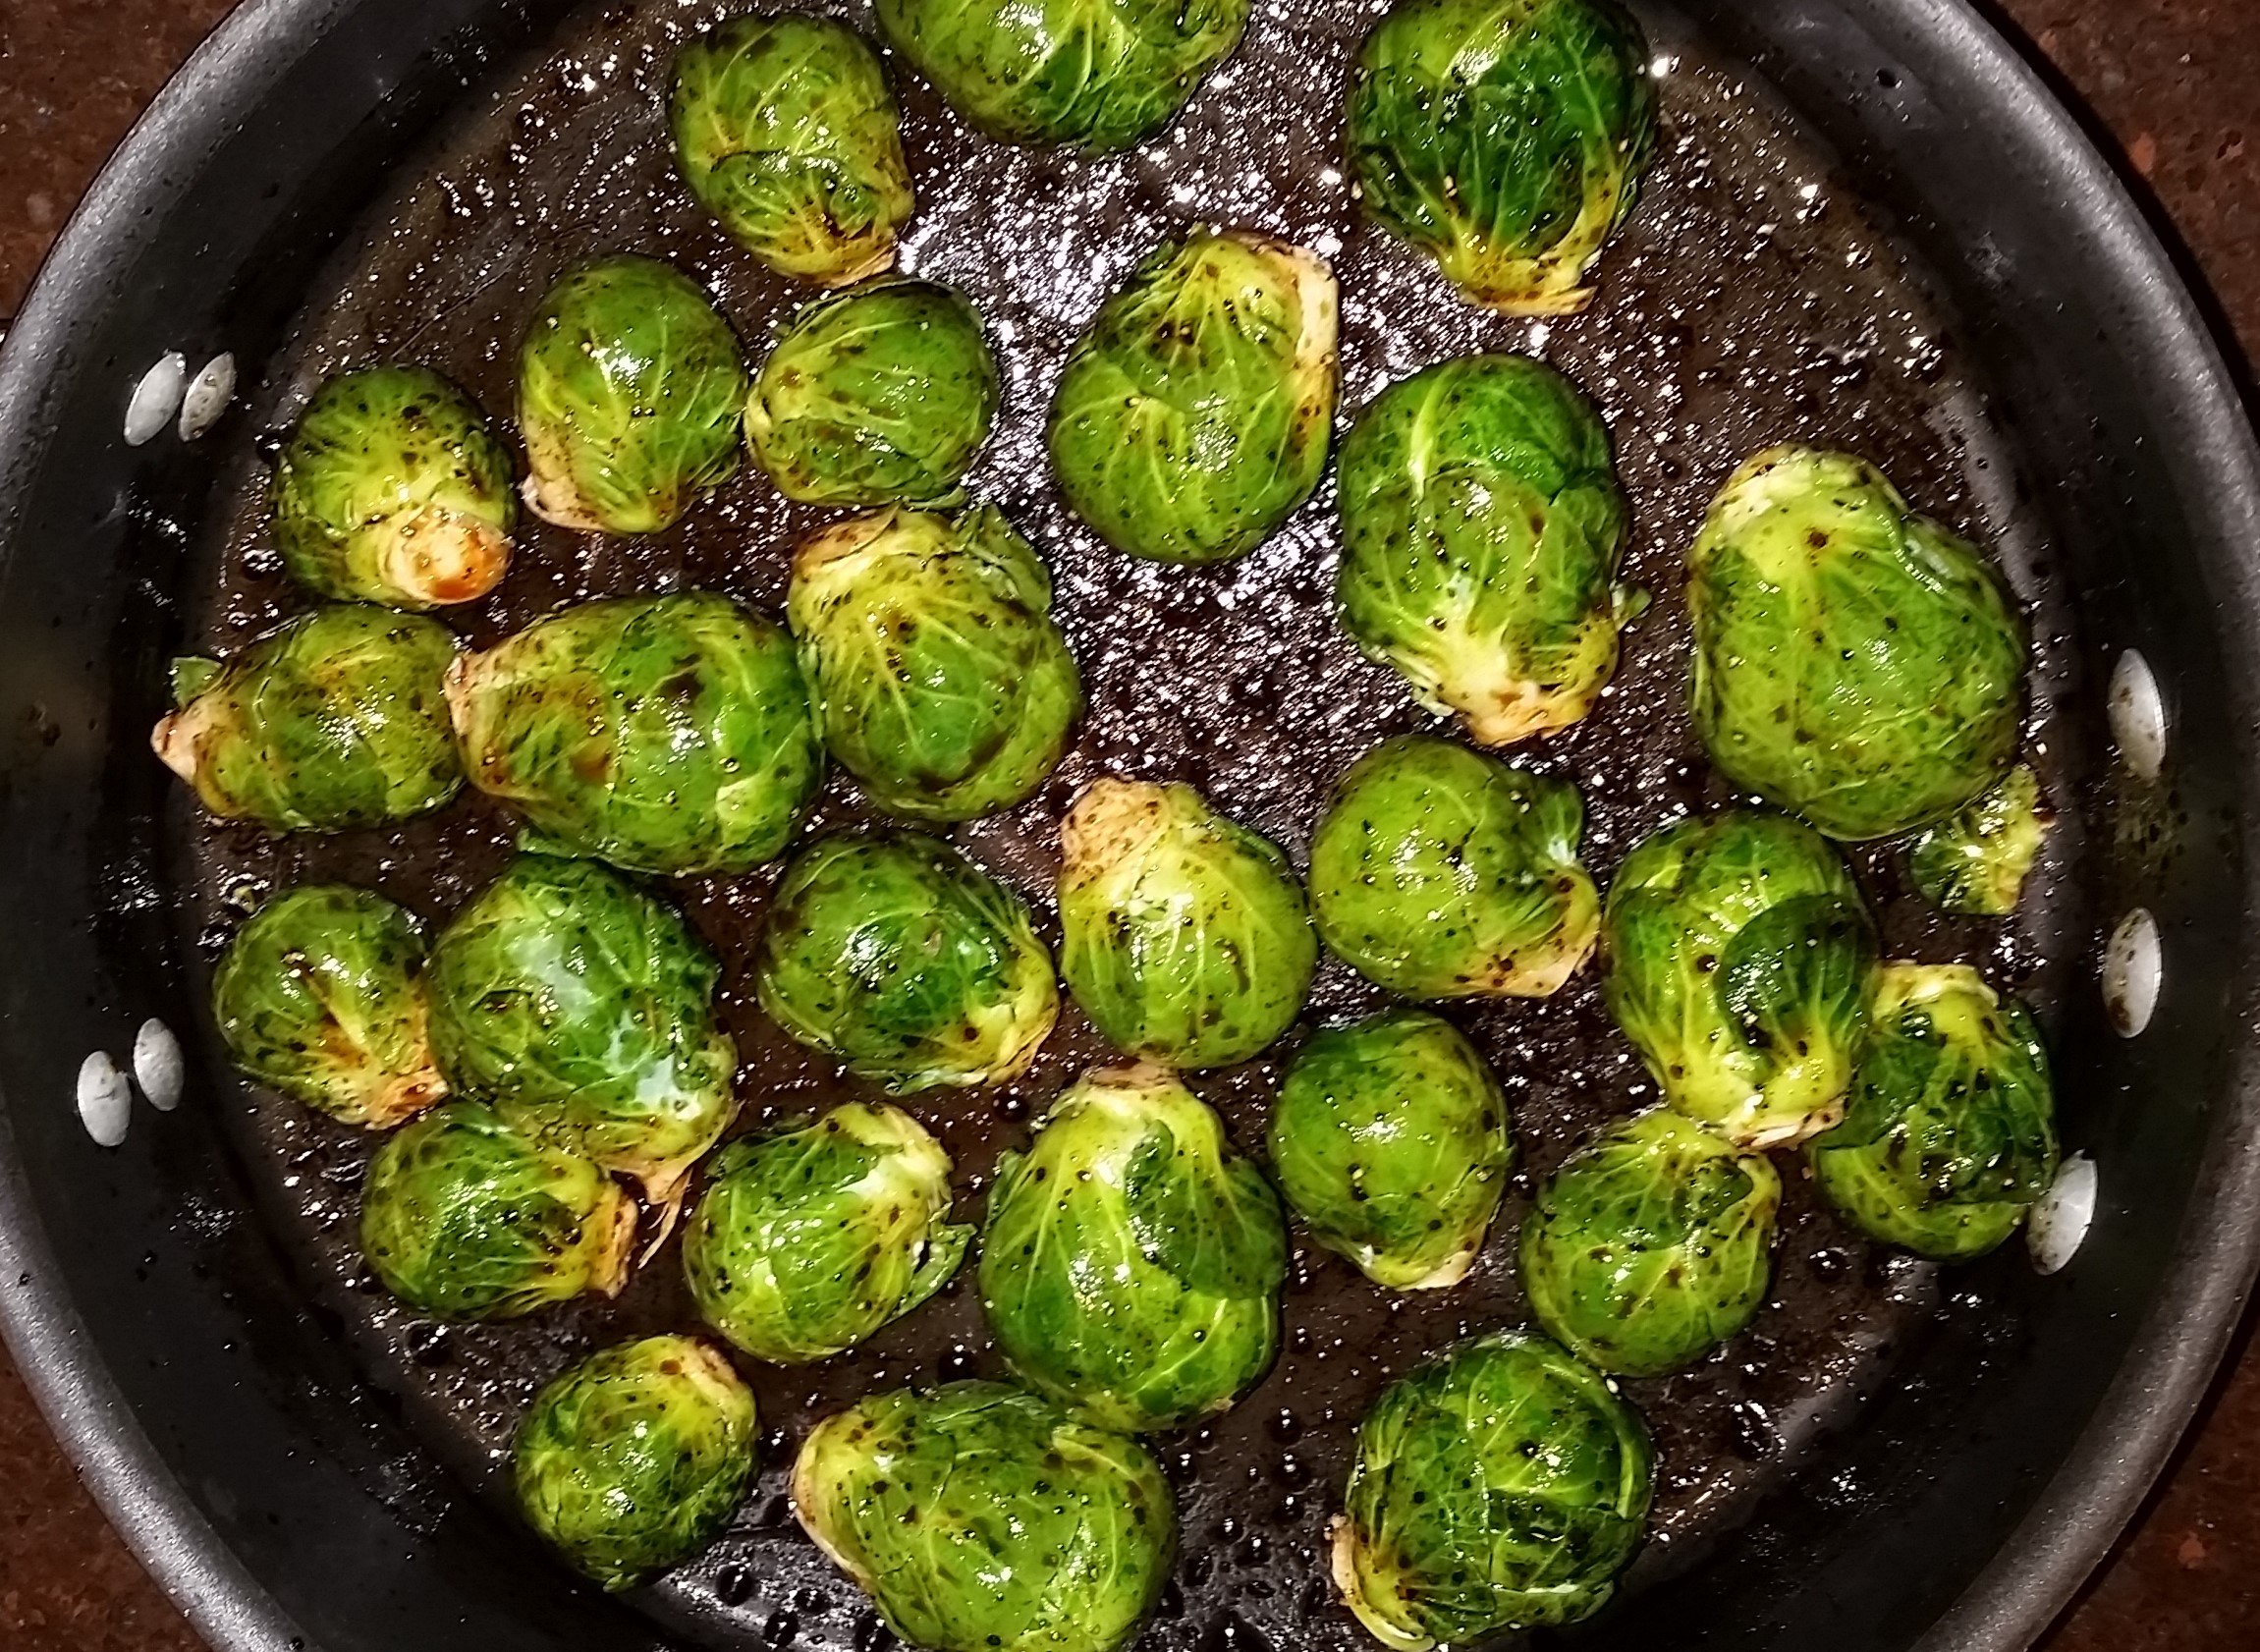 brussels sprouts marinating in balsamic